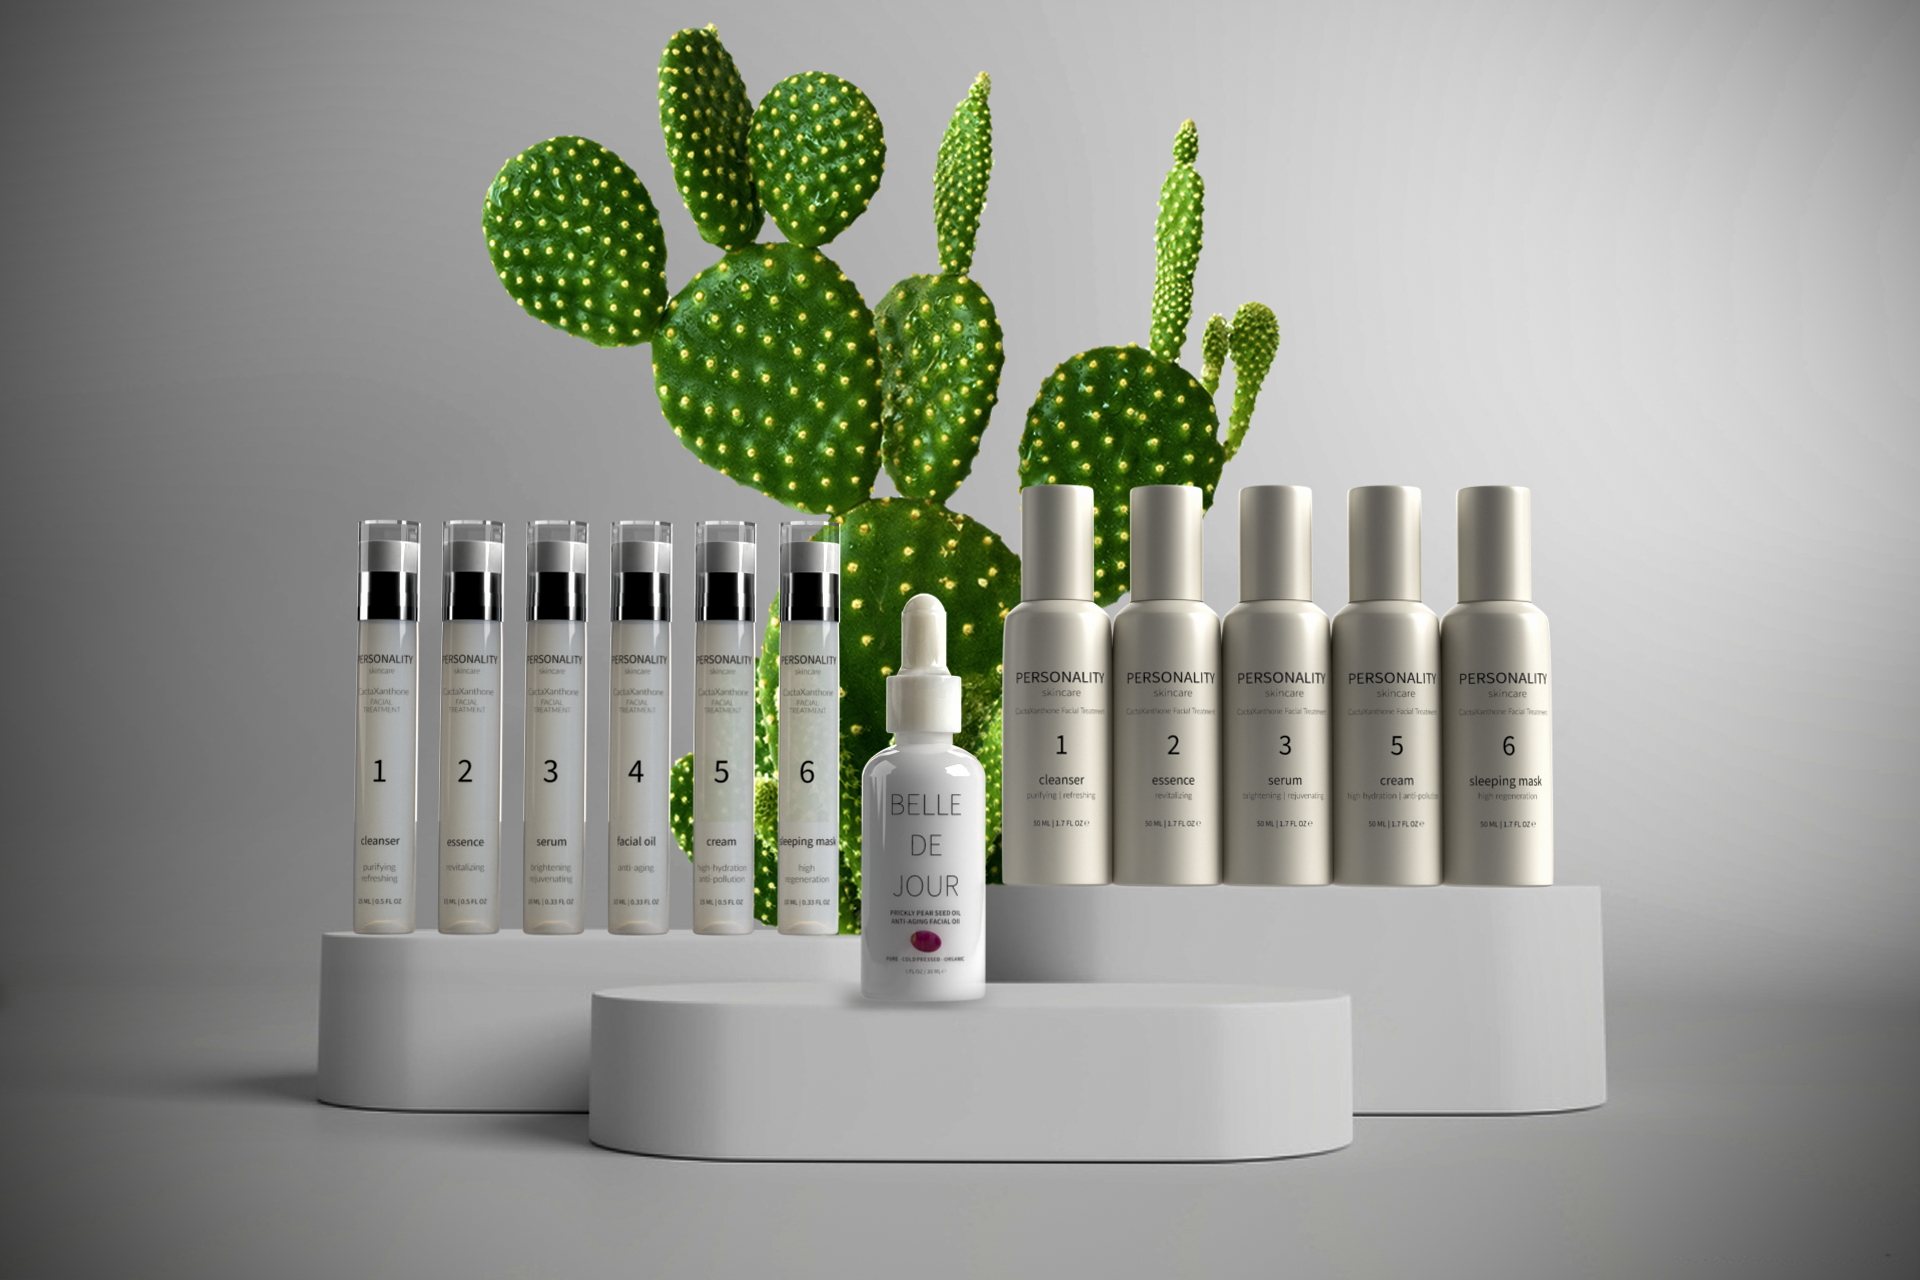 Cactus skincare routine - anti aging, anti-acne, high hydration, get all benefits from Cactus, the most antioxidants plant